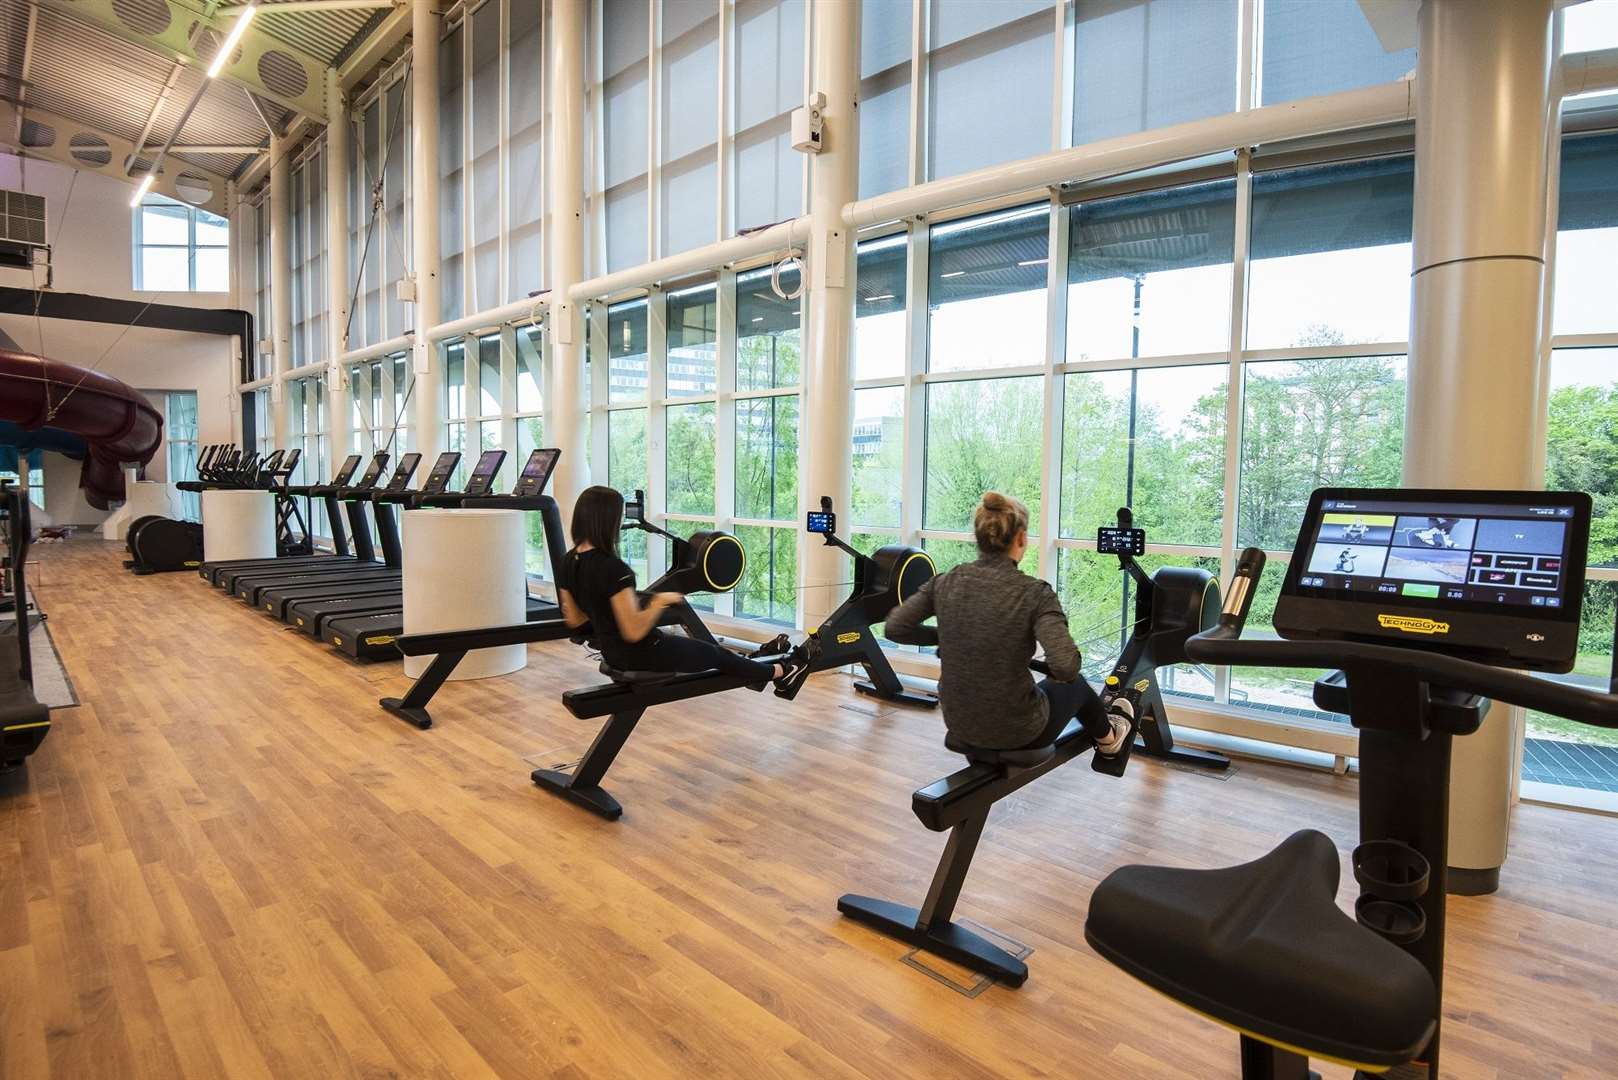 There's plenty of gym equipment, so wait times will be minimal